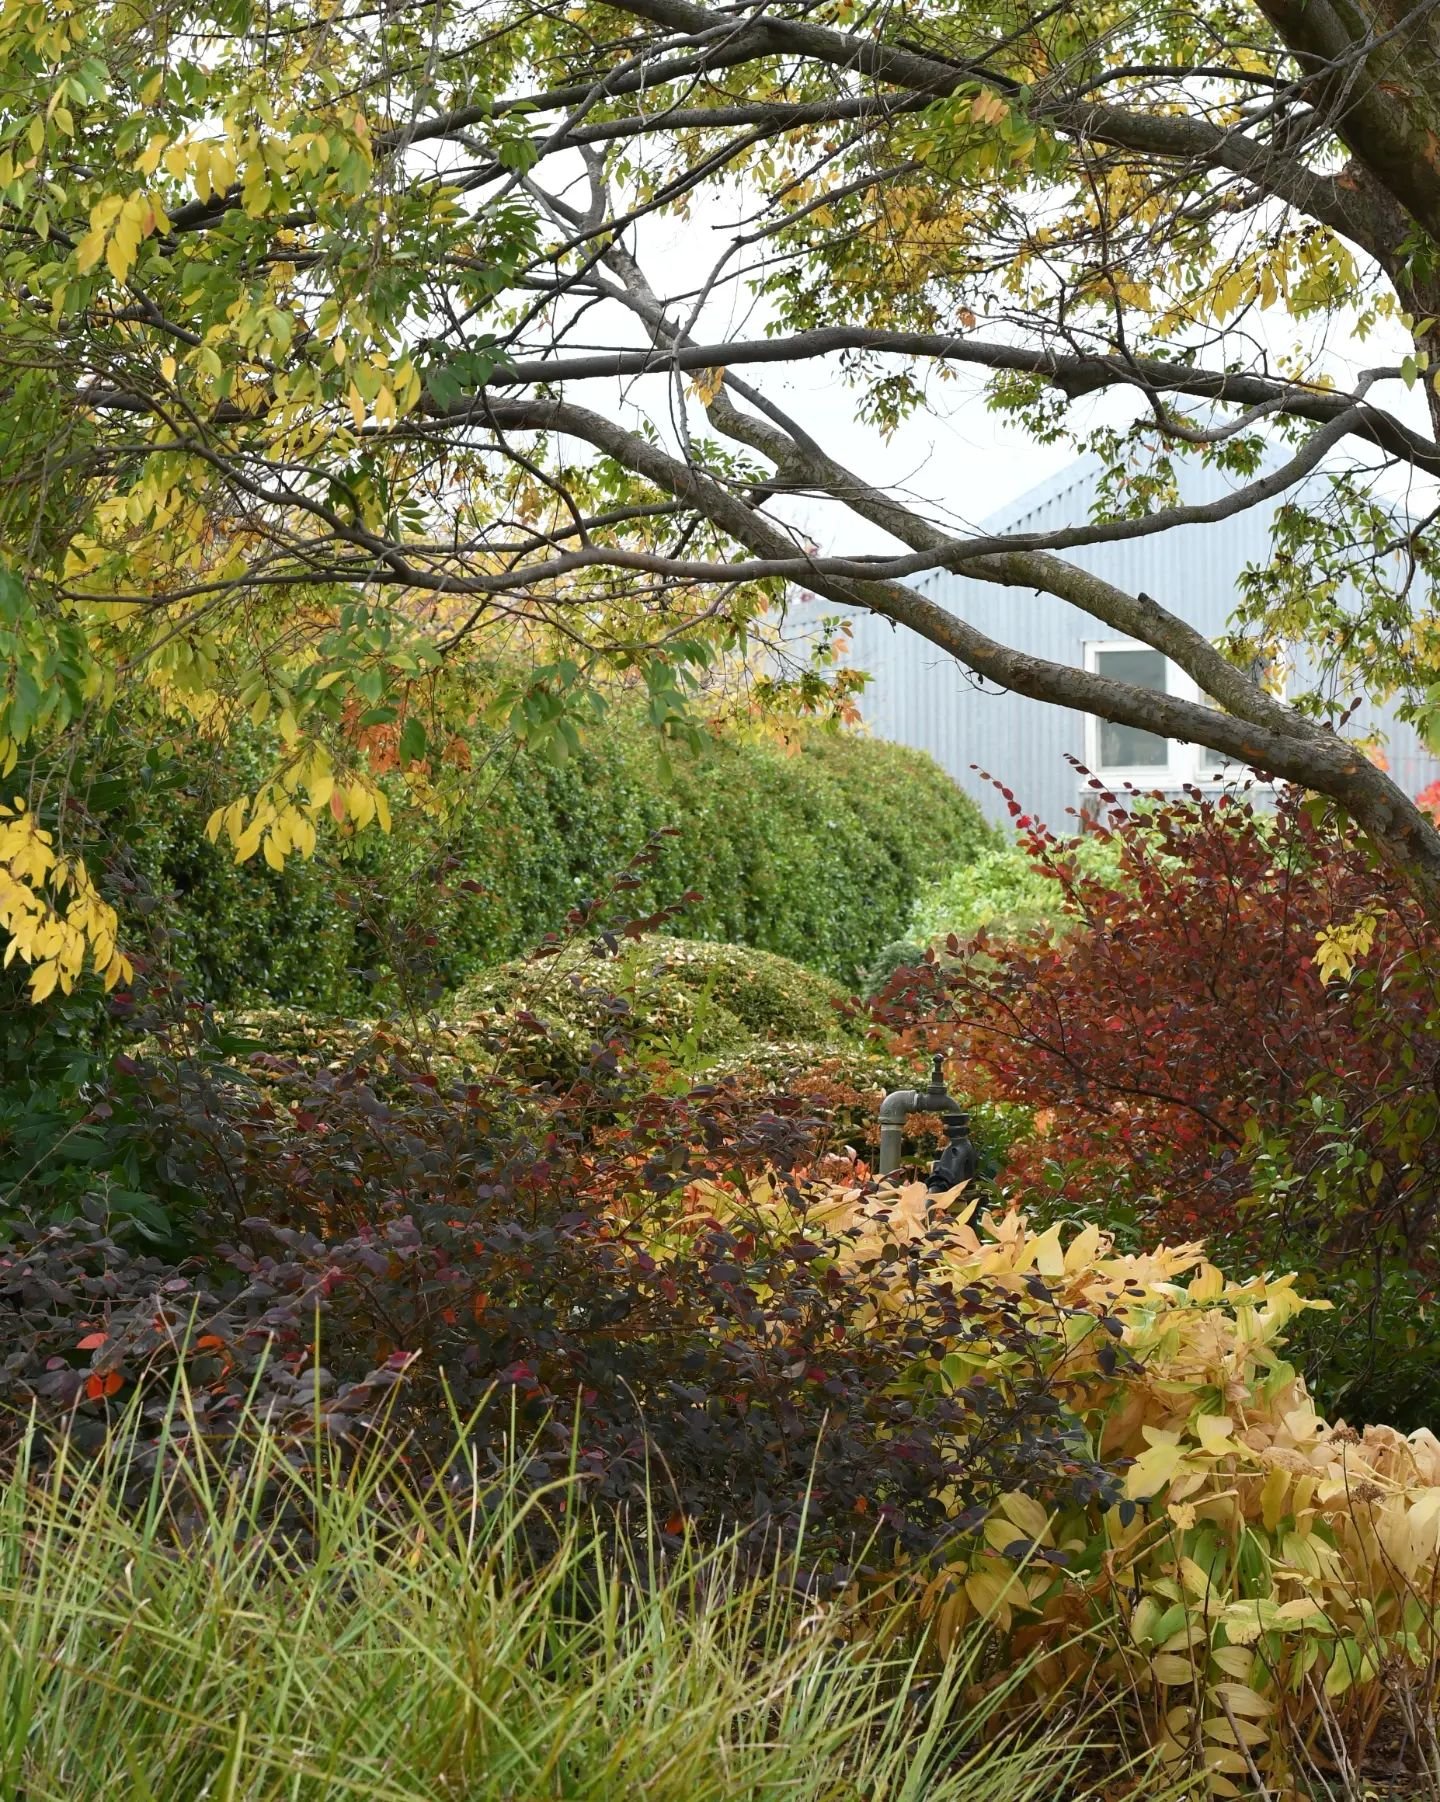 On the slope that rises from the front terrace, where the stone steps meet the viburnum hedge leading to the studio cottage, there is much autumnal colour. The Solomon's seal under the Chinese elm has turned butter yellow, the loropetalum remain inky